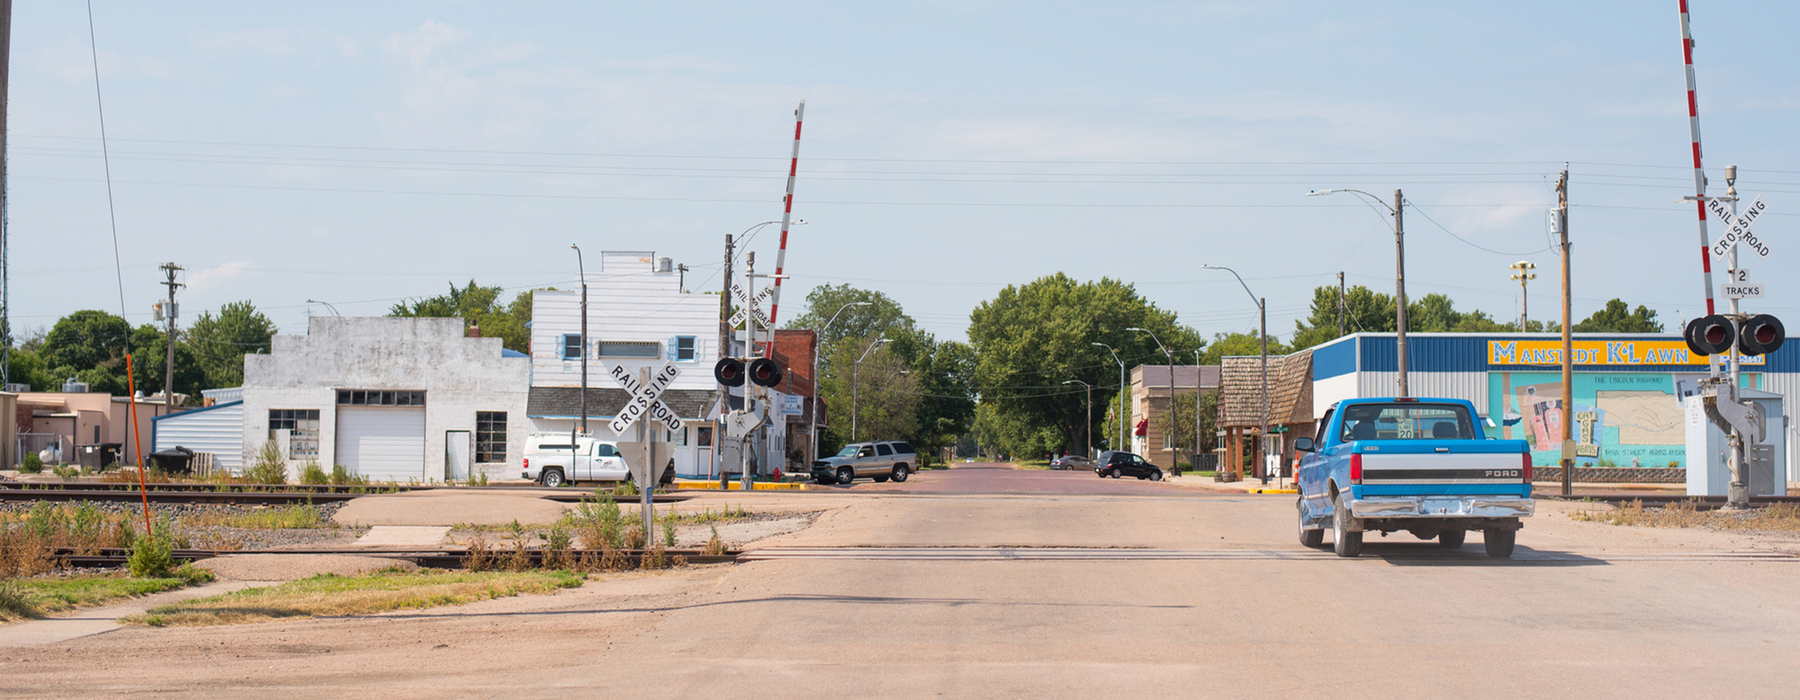 Blue and white truck crosses railroad tracks into a rural downtown with facades needing repair